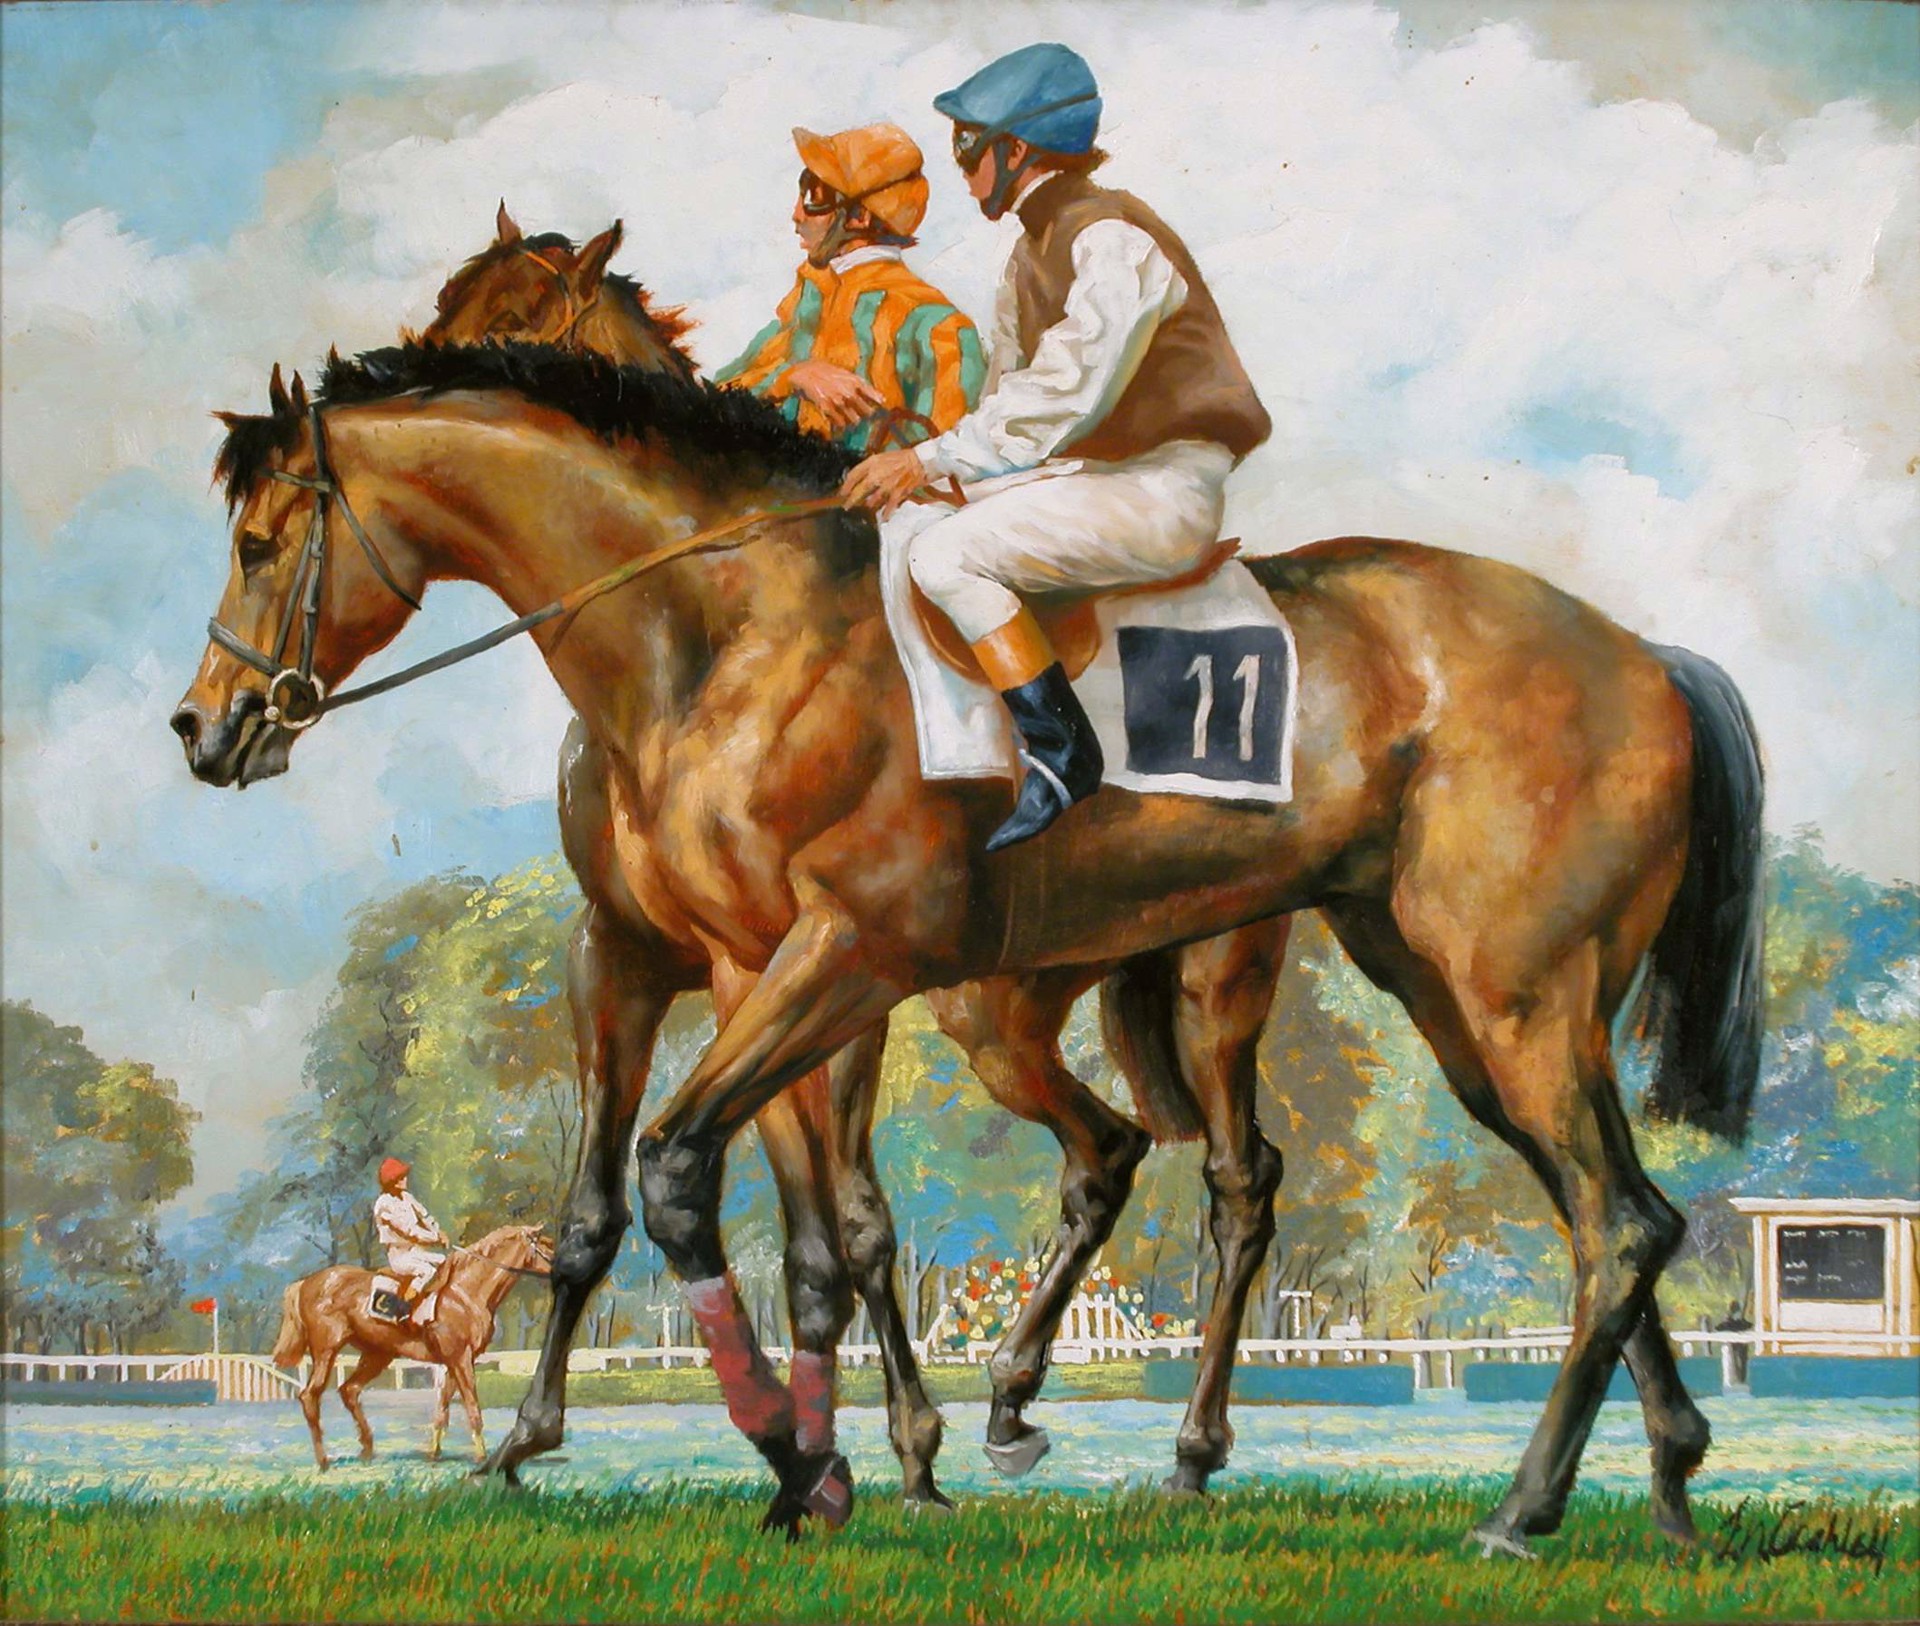 Auteuil: End of the Race (A6) by Frank N. Ashley